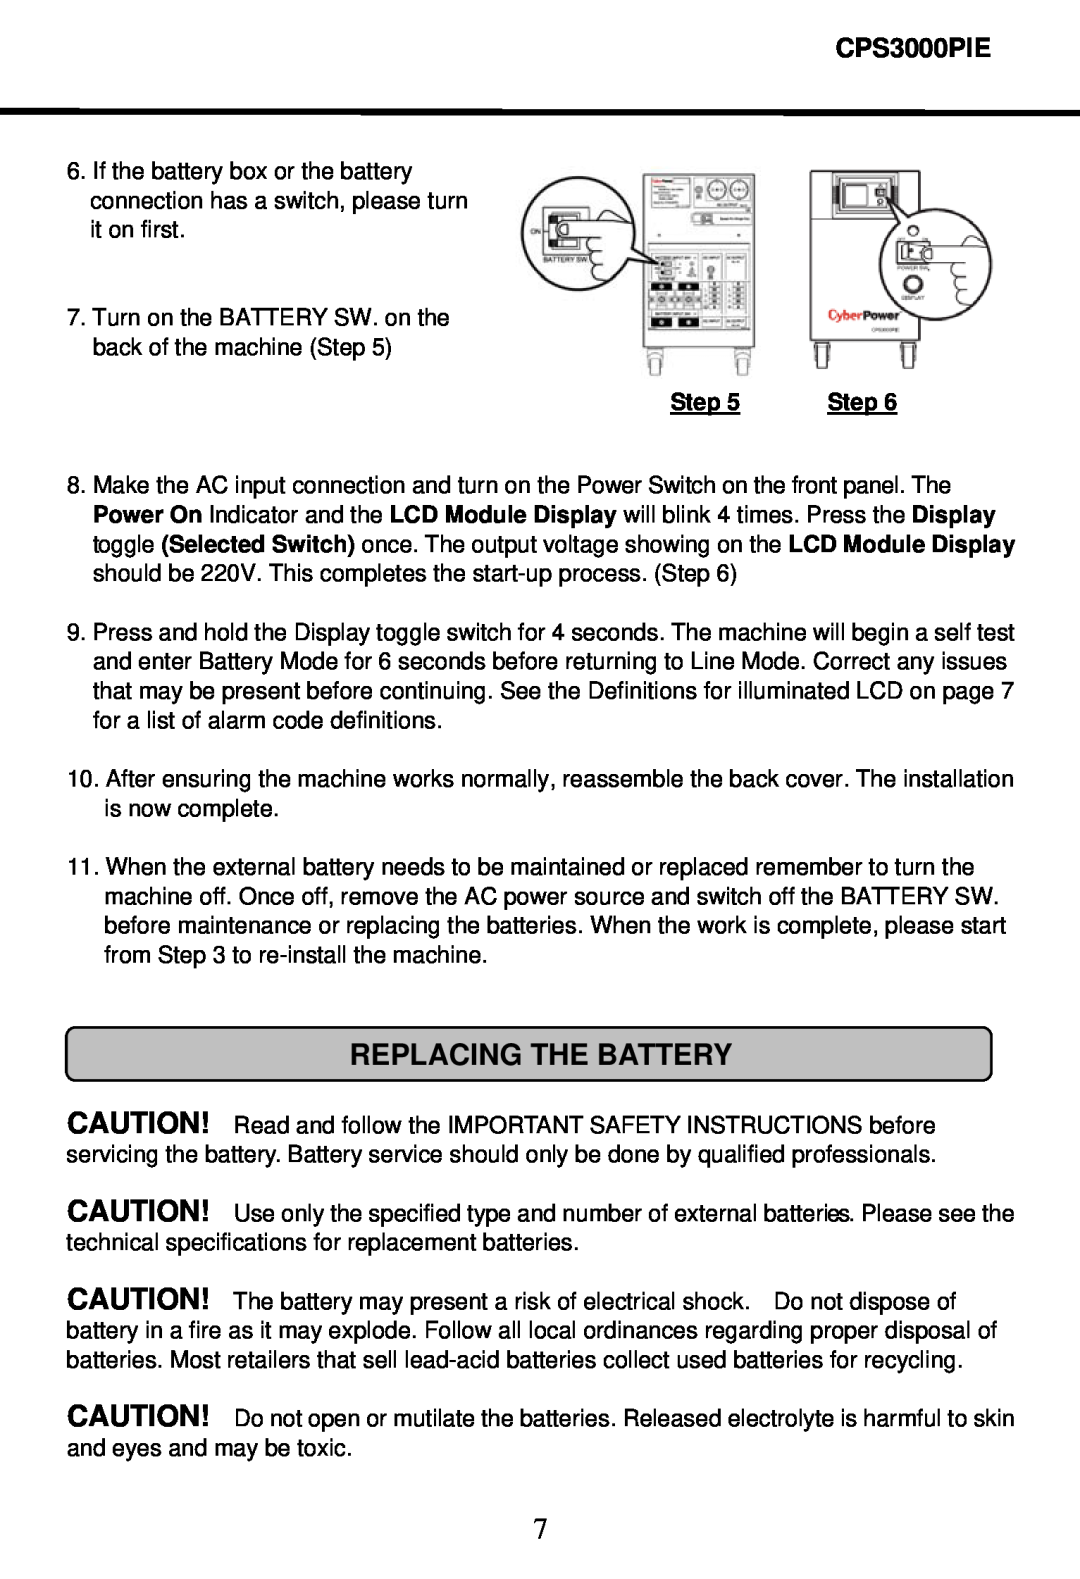 CyberPower Systems CPS3000PIE user manual Replacing The Battery, Step 